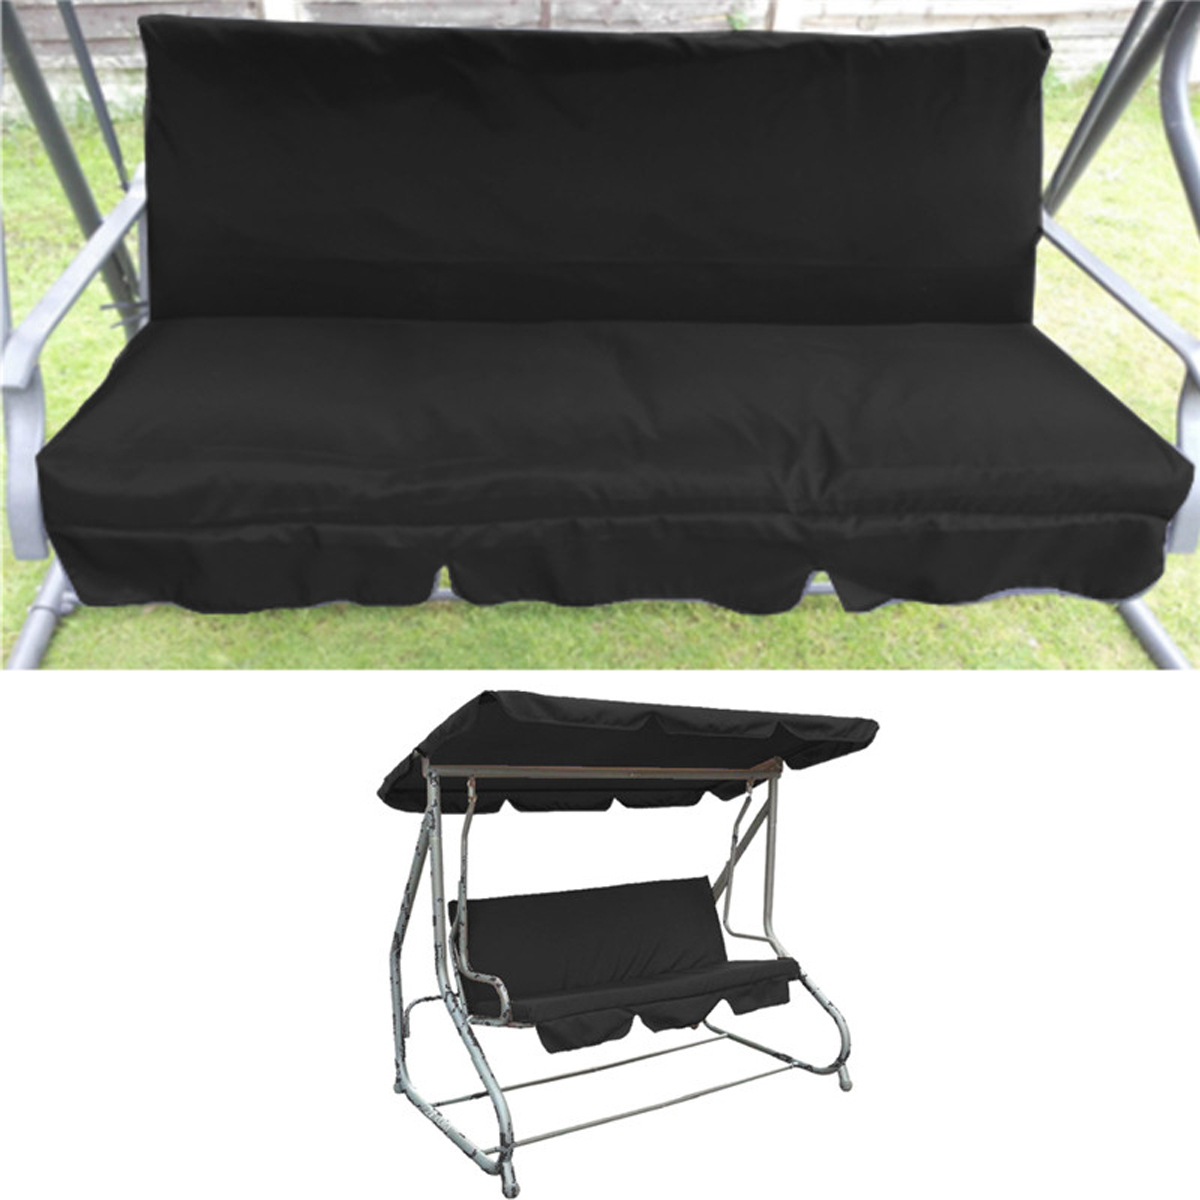 Outdoor Swing Chair Waterproof Cover, How To Replace Outdoor Swing Cushions